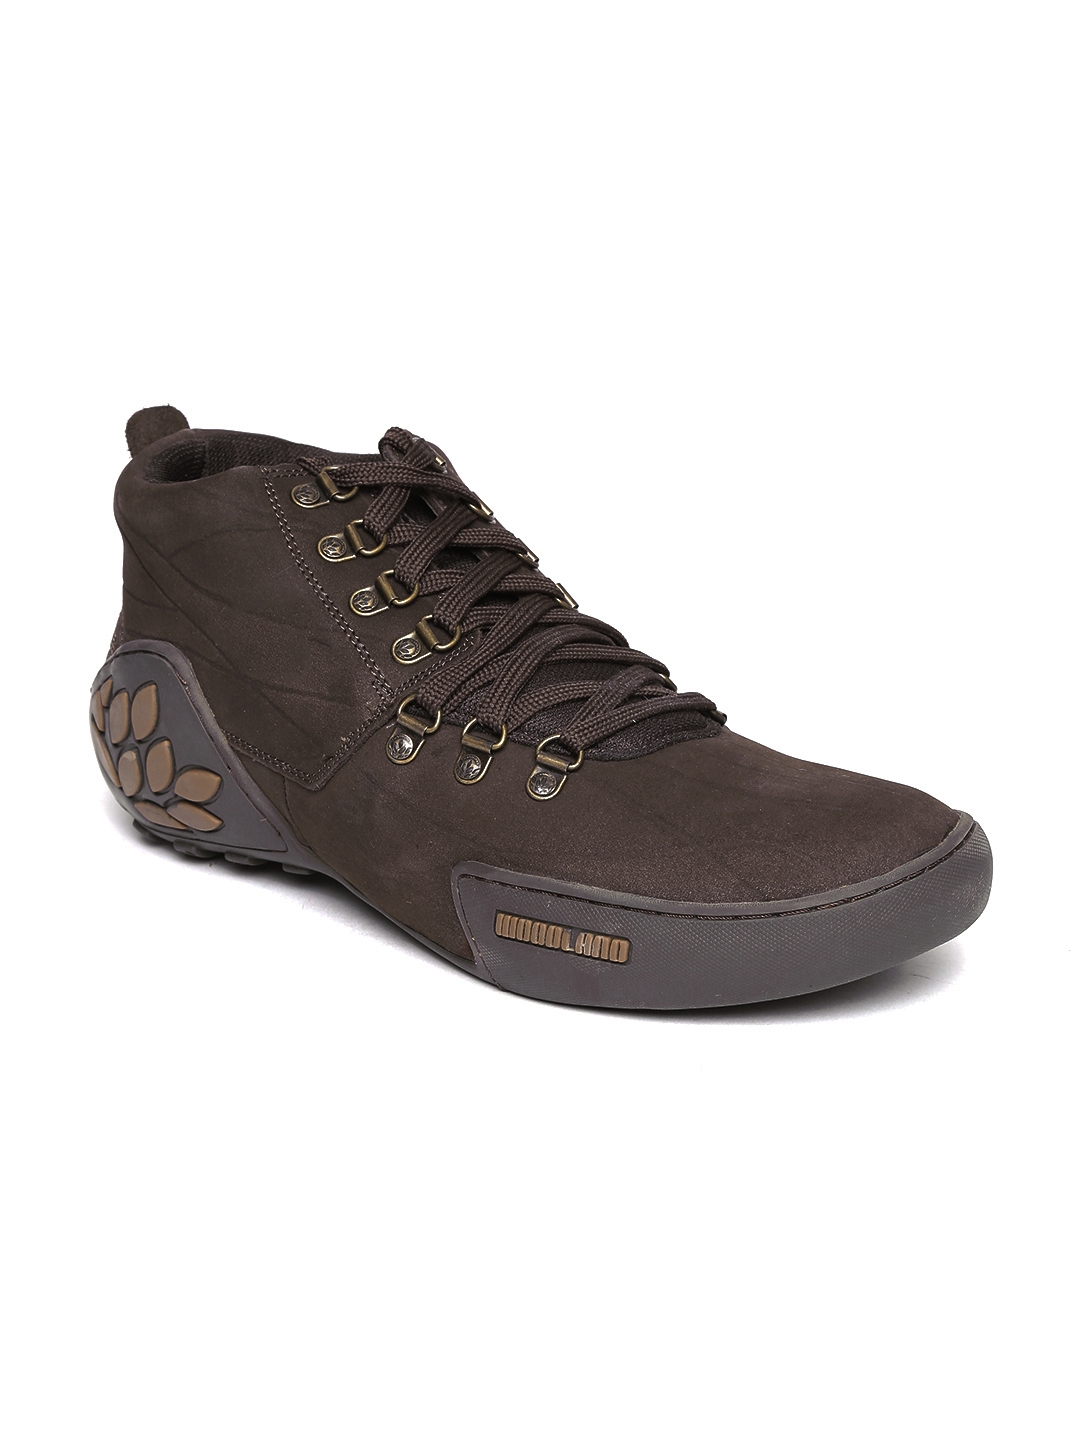 Buy Woodland Men Round Toe Sneakers - Casual Shoes for Men 1859123 | Myntra